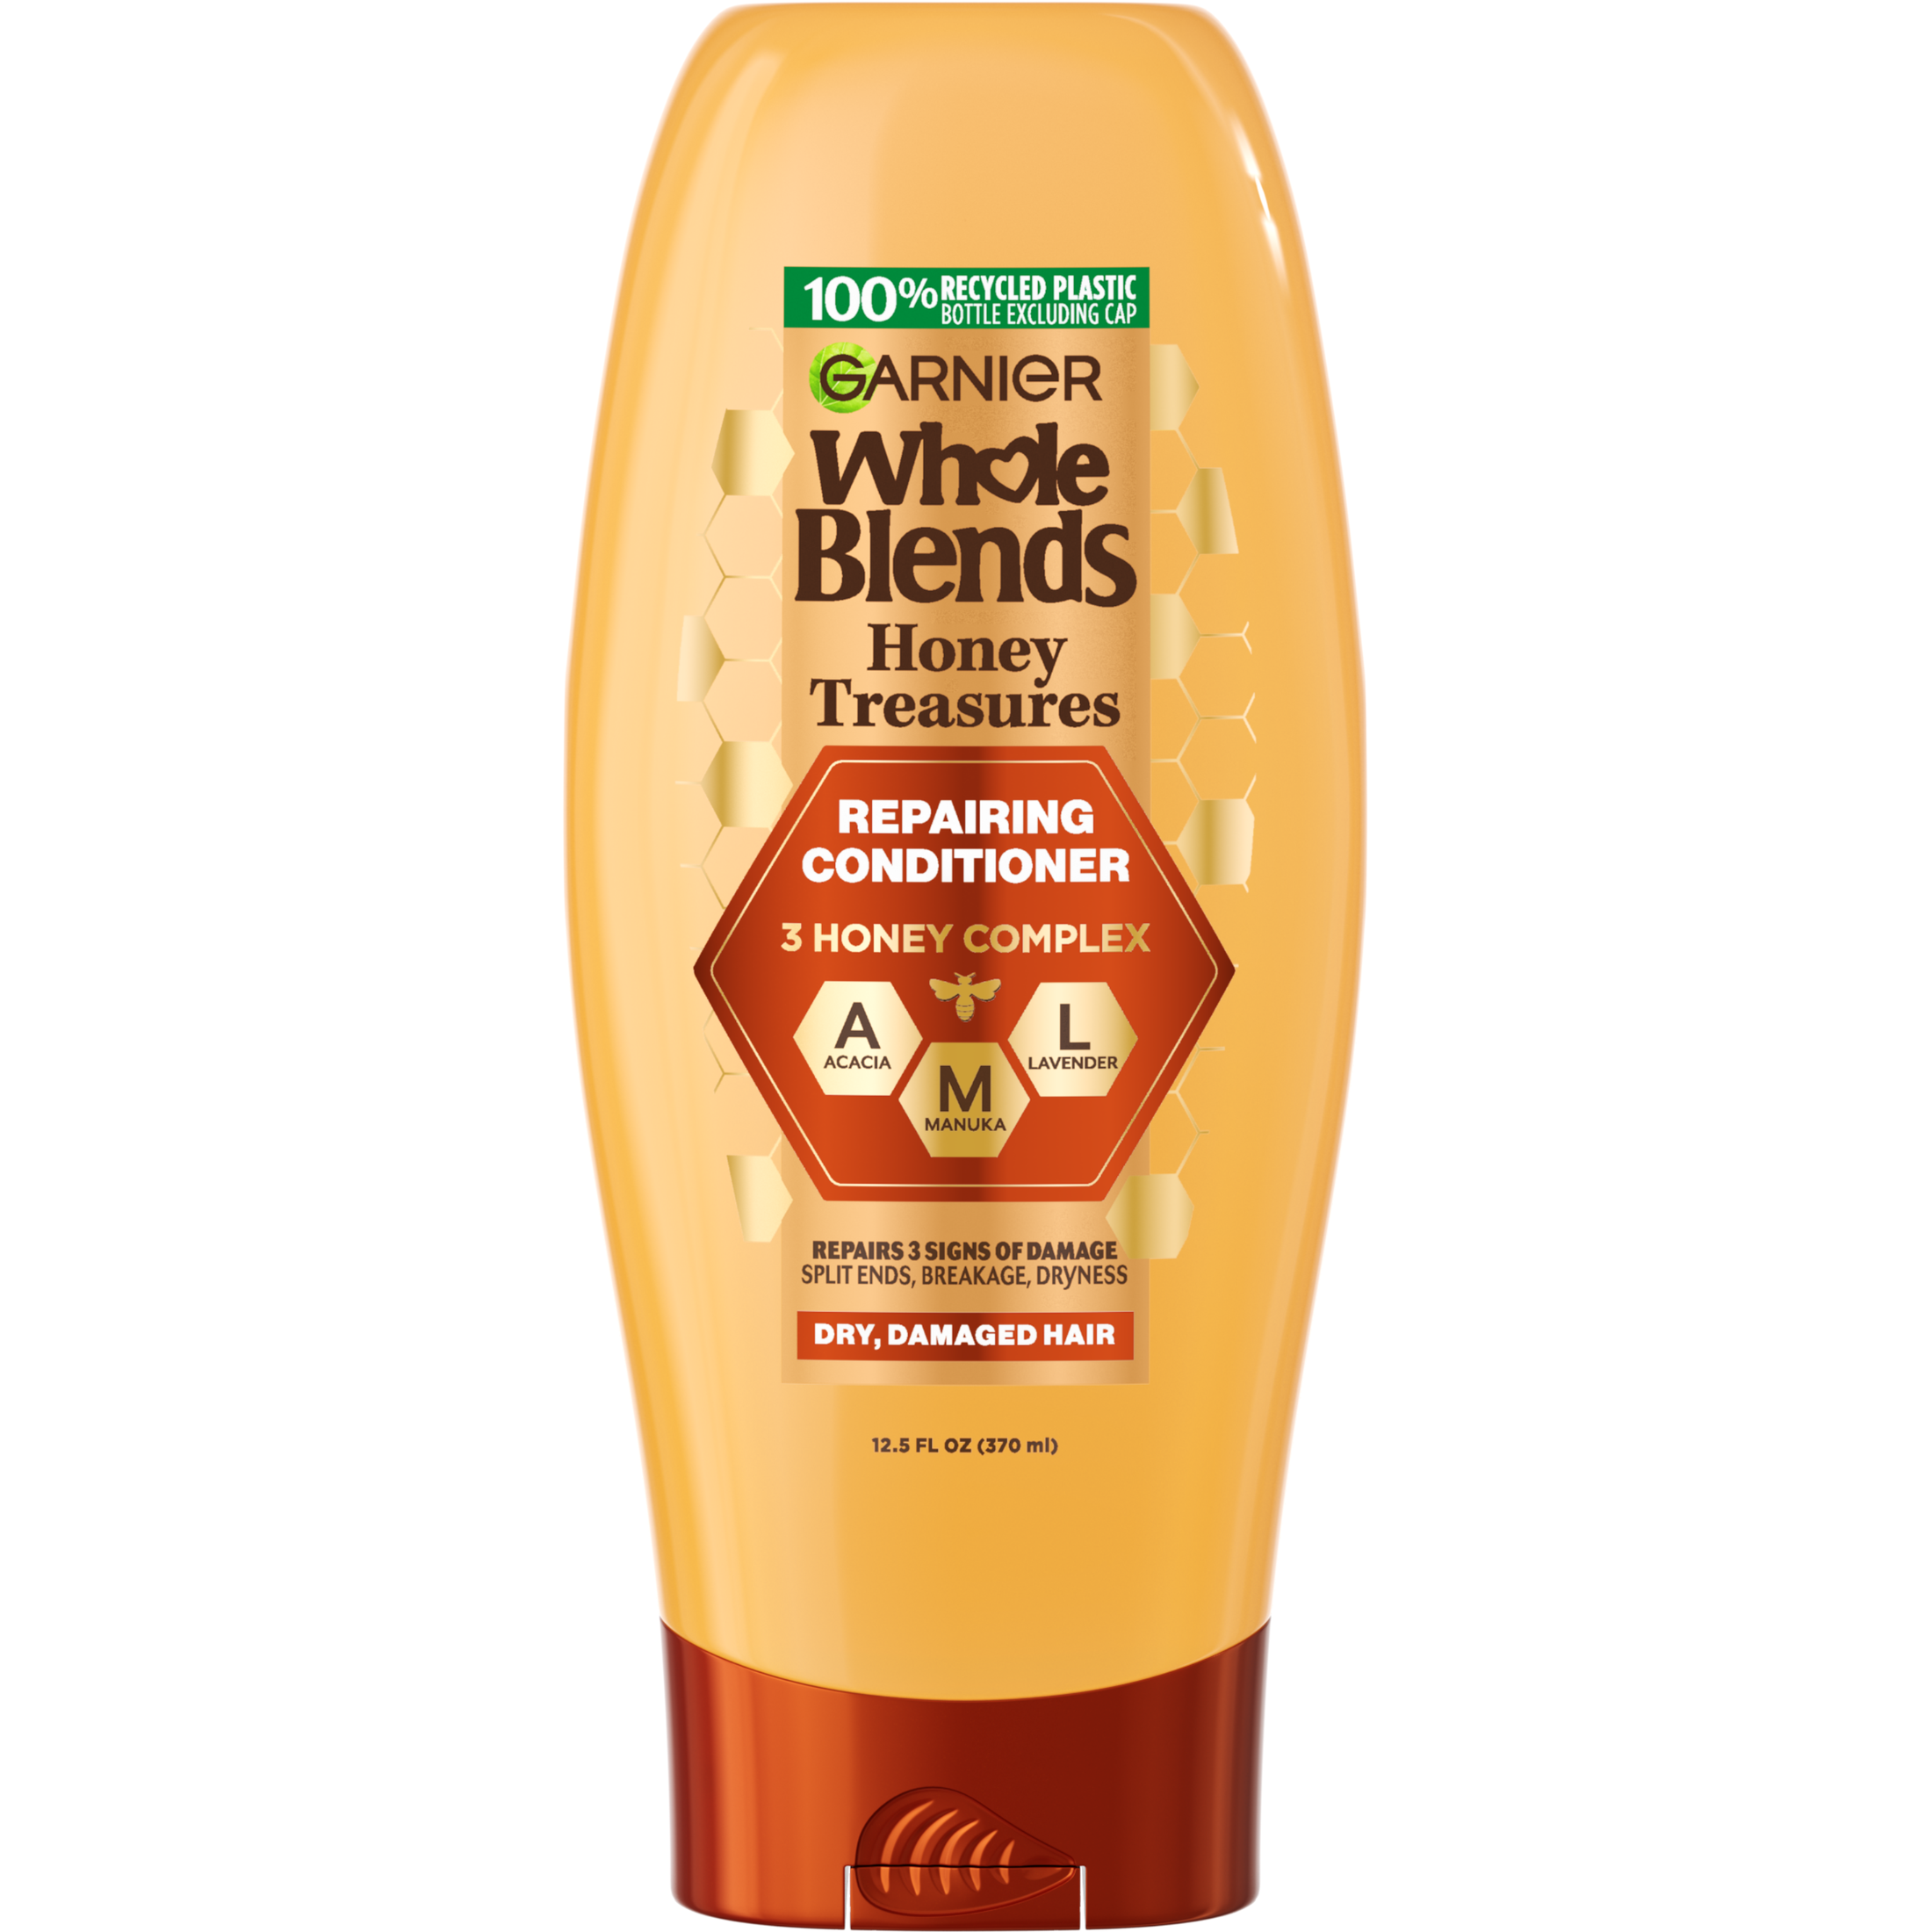 Garnier Whole Blends Honey Treasures Repairing Conditioner with Royal Jelly Honey, 12.5 fl oz - image 1 of 12